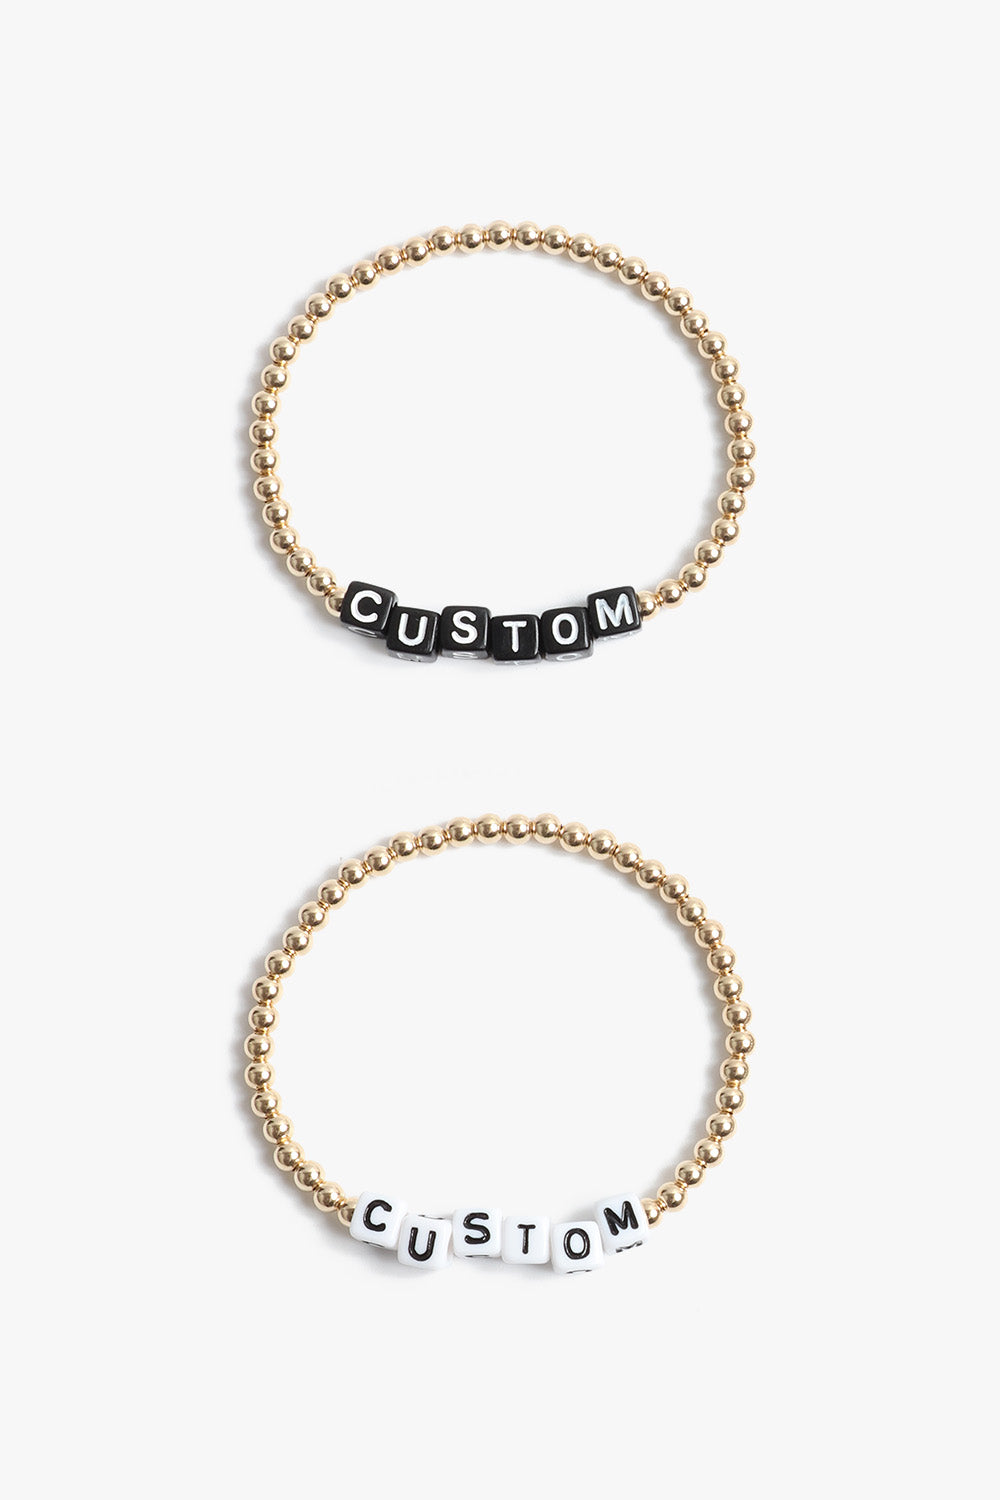 Marin Costello Jewelry Crown Letter Bracelet beaded block letter bracelet, customizable. Black or white block letters, gold or silver beads. Waterproof, sustainable, hypoallergenic.14k gold plated stainless steel.